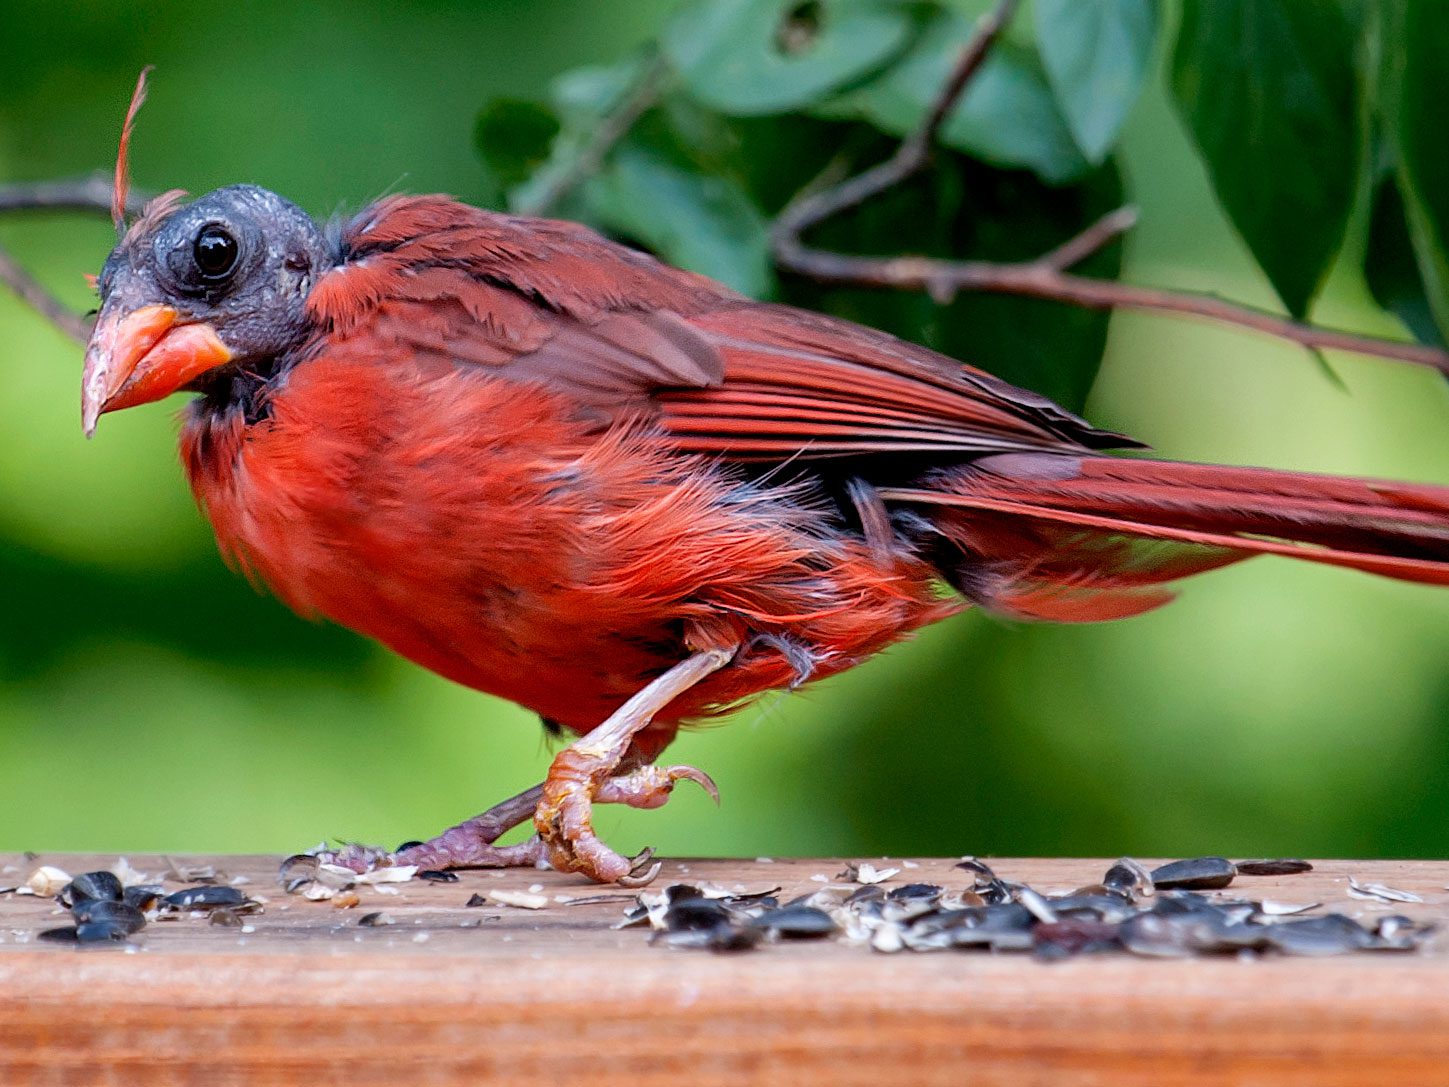 Why Some Birds Have Red Feathers